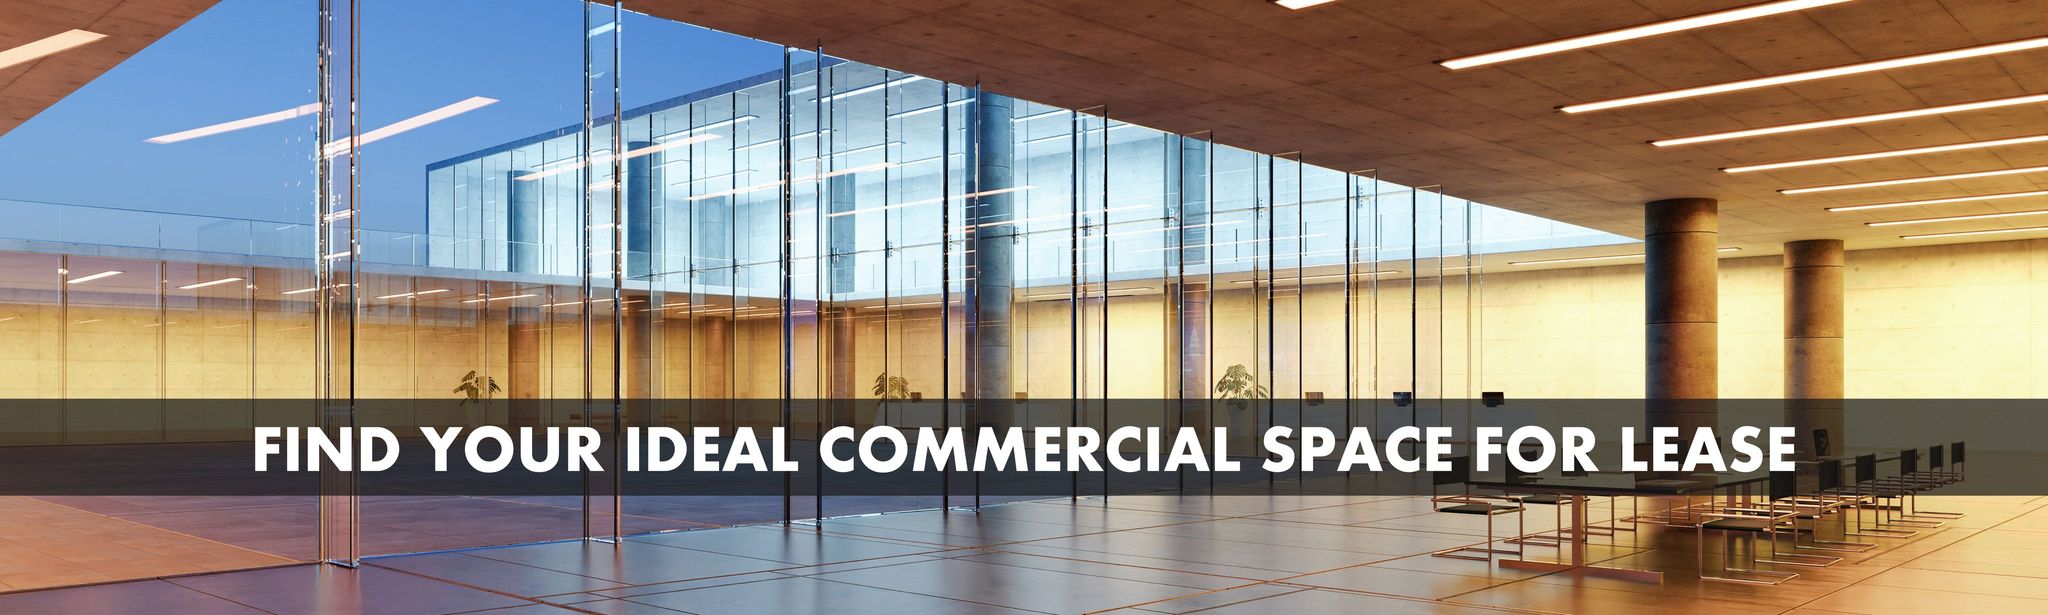 tampa commercial real estate for lease